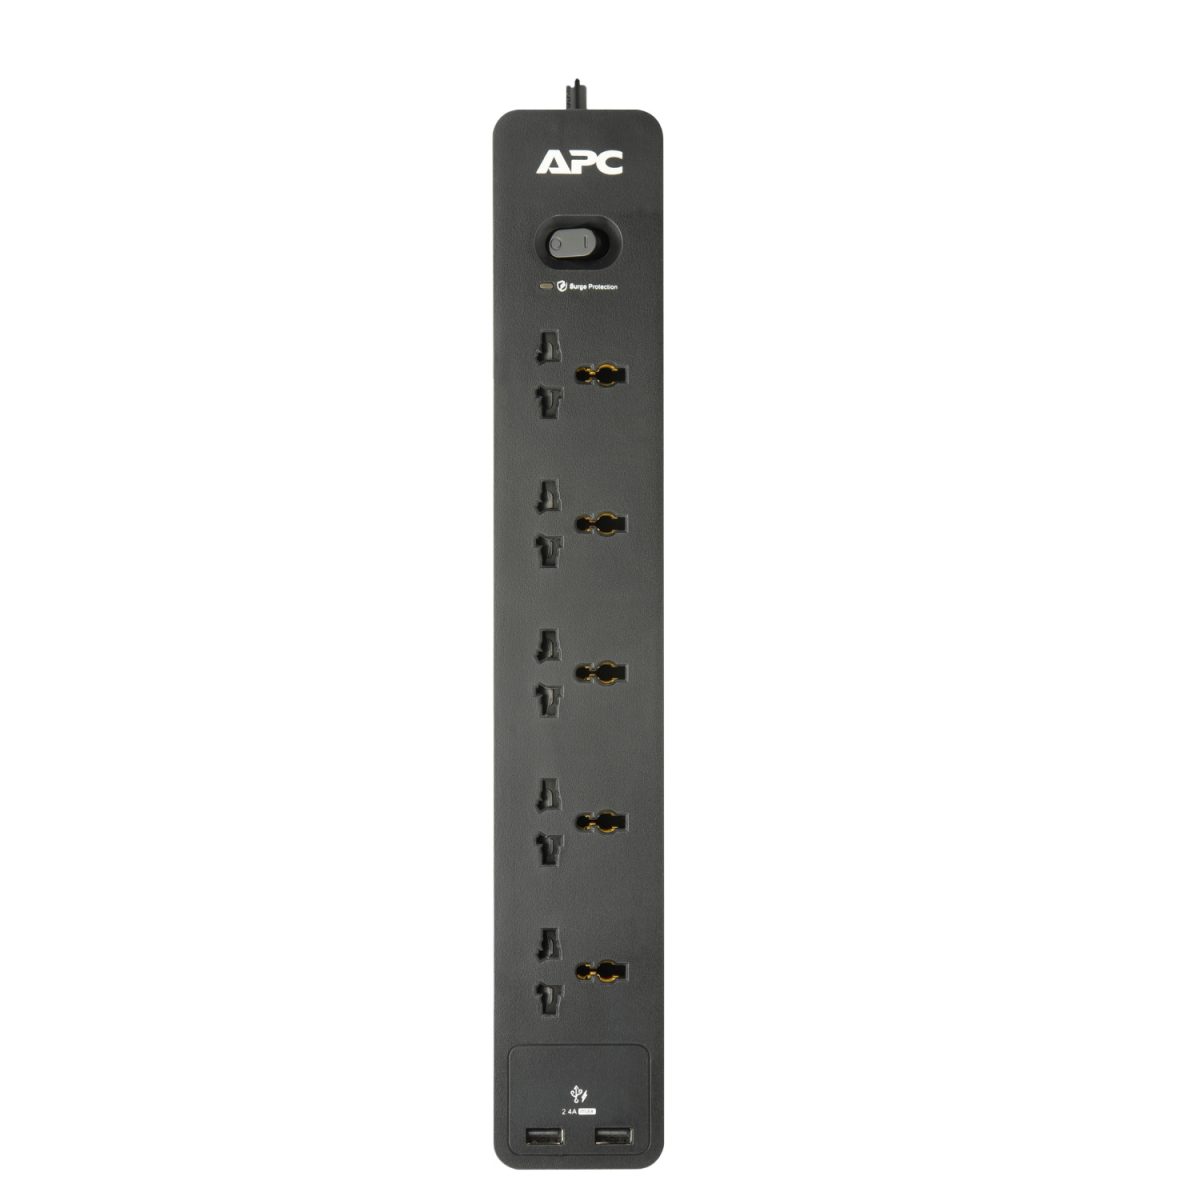 APC SurgeArrest Essential With Surge Protector And 5x Universal Plugs Power Strip PME5U2B-MS